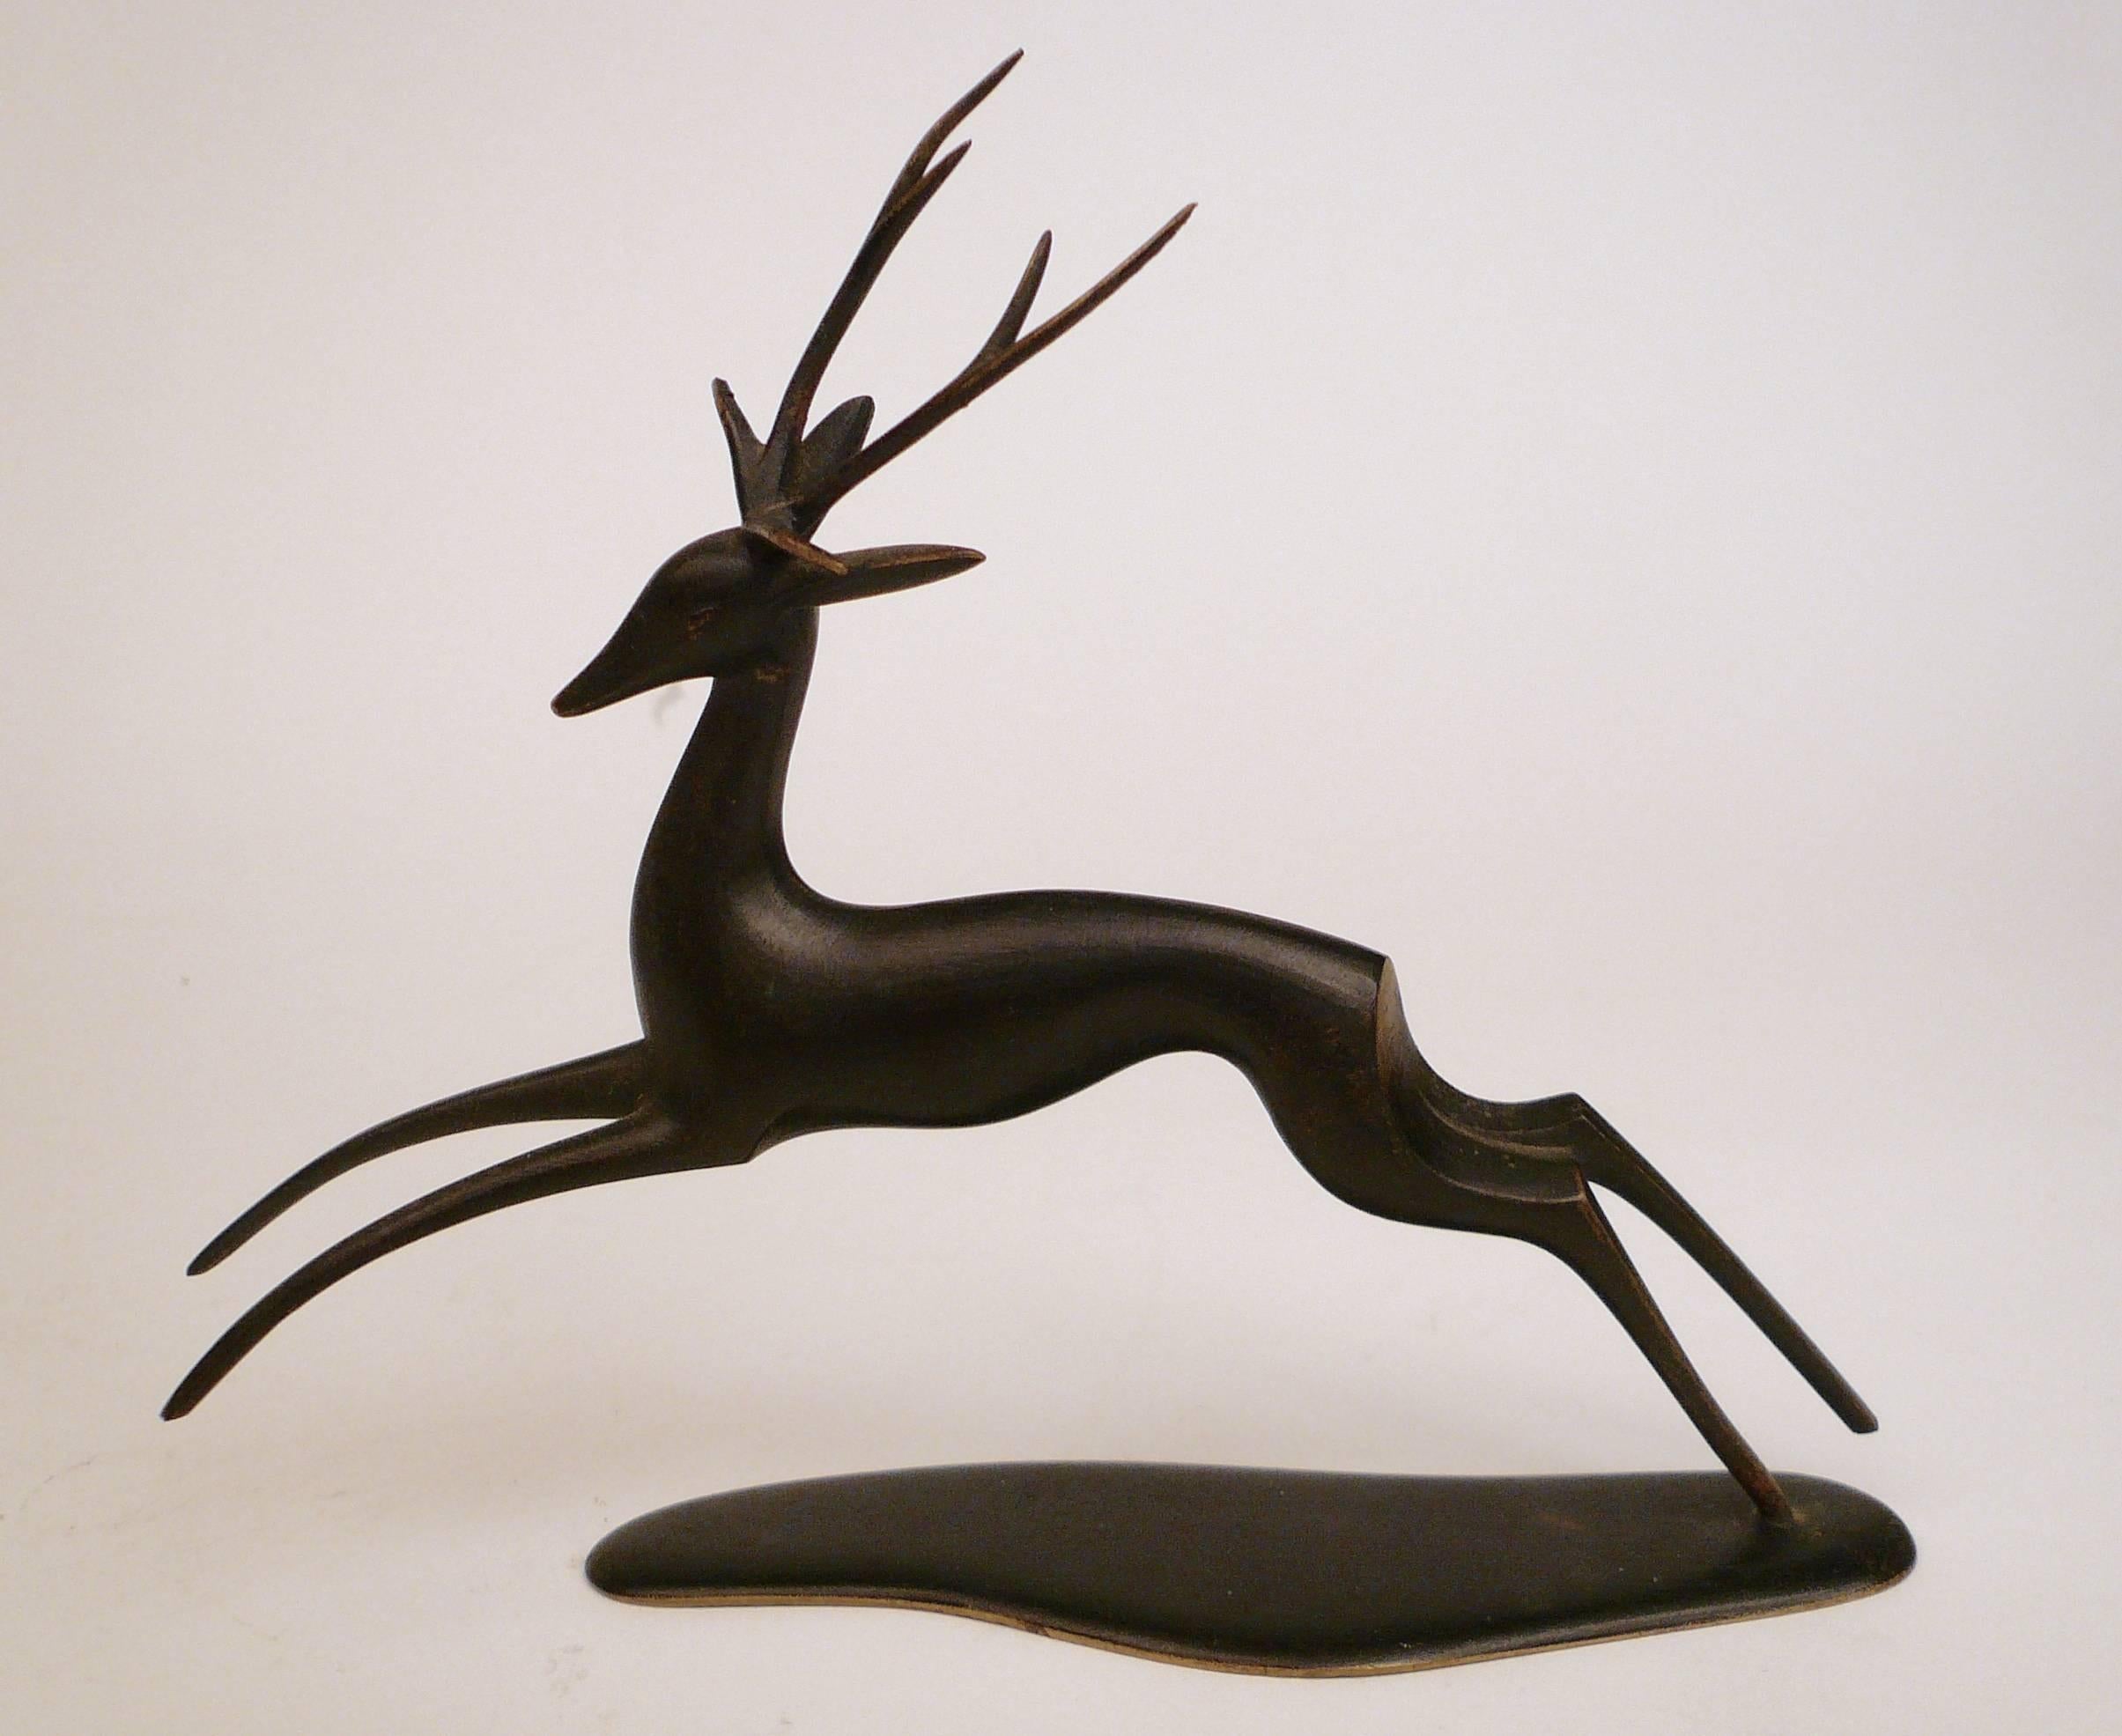 This high style sculpture of a leaping stag was handmade in the famed Werkstatte Hagenauer, Wien.